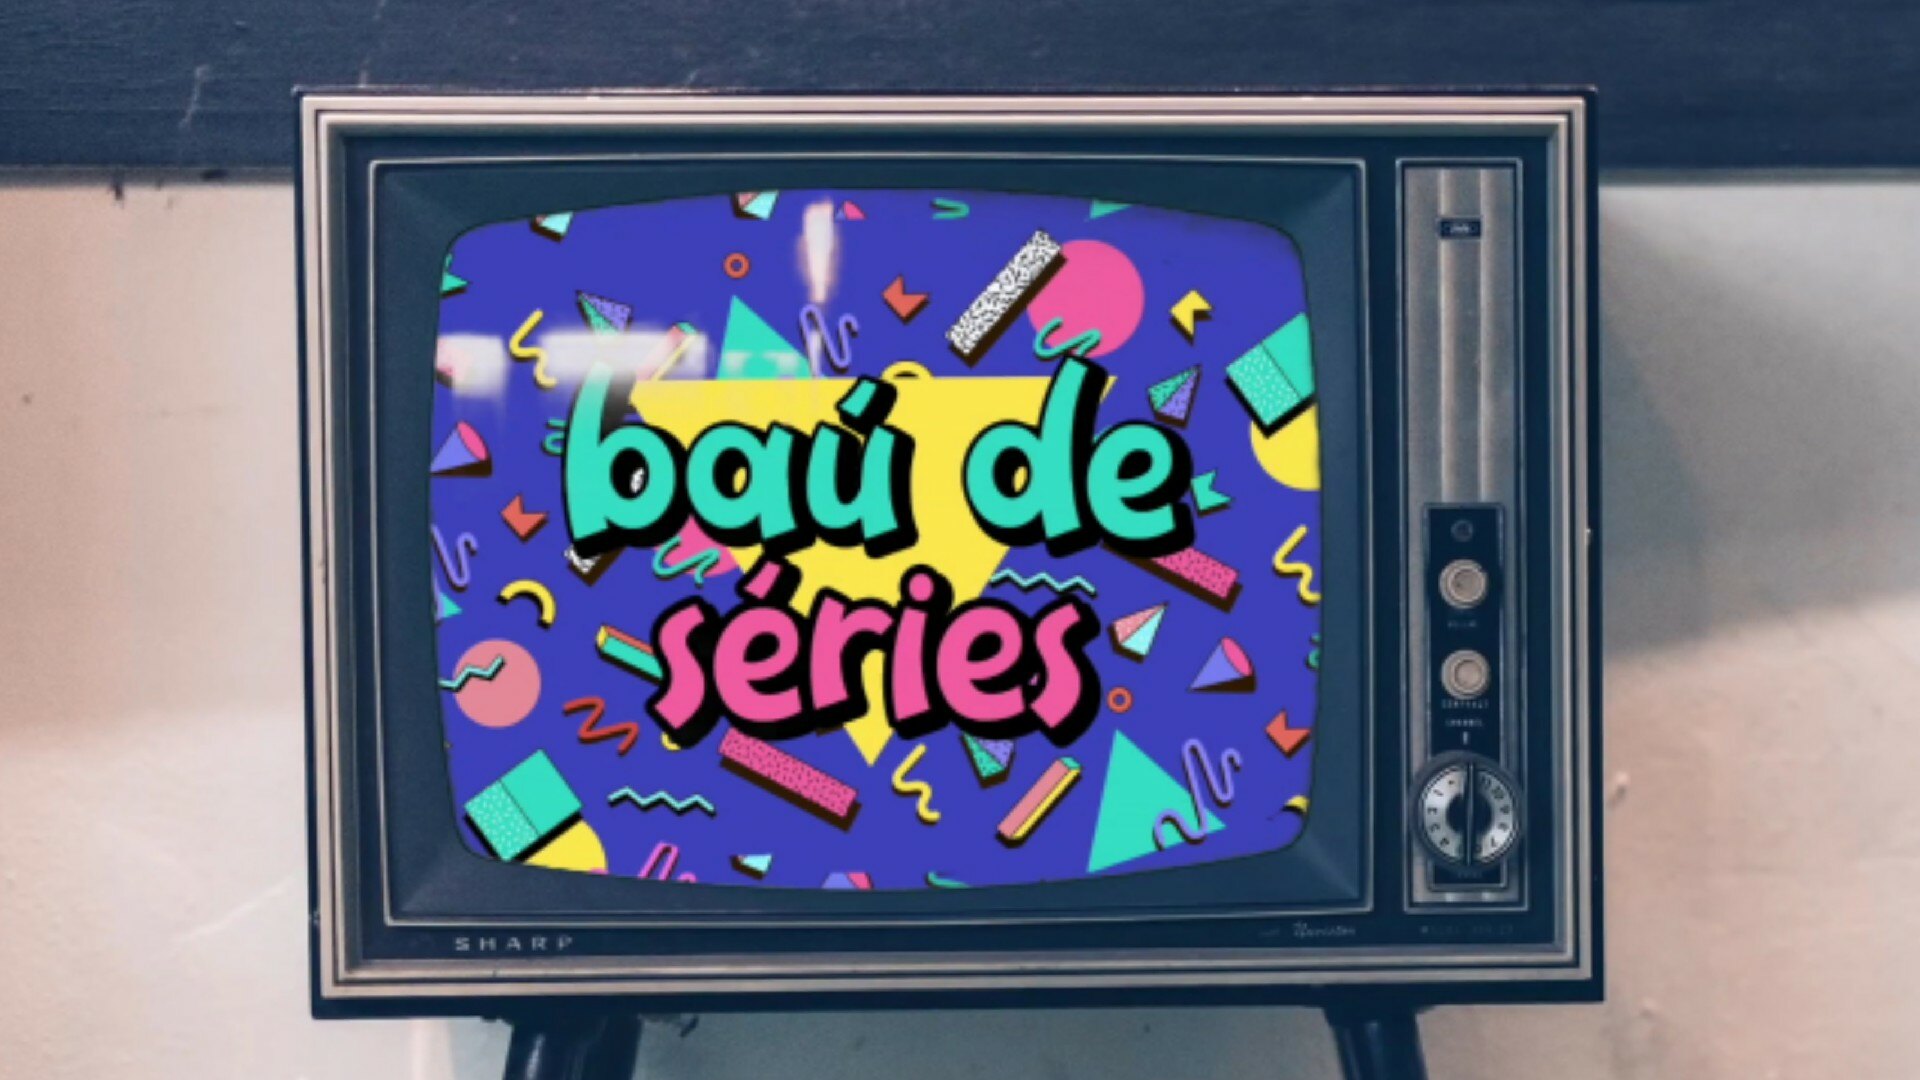 ba-de-s-ries-countdown-how-many-days-until-the-next-episode